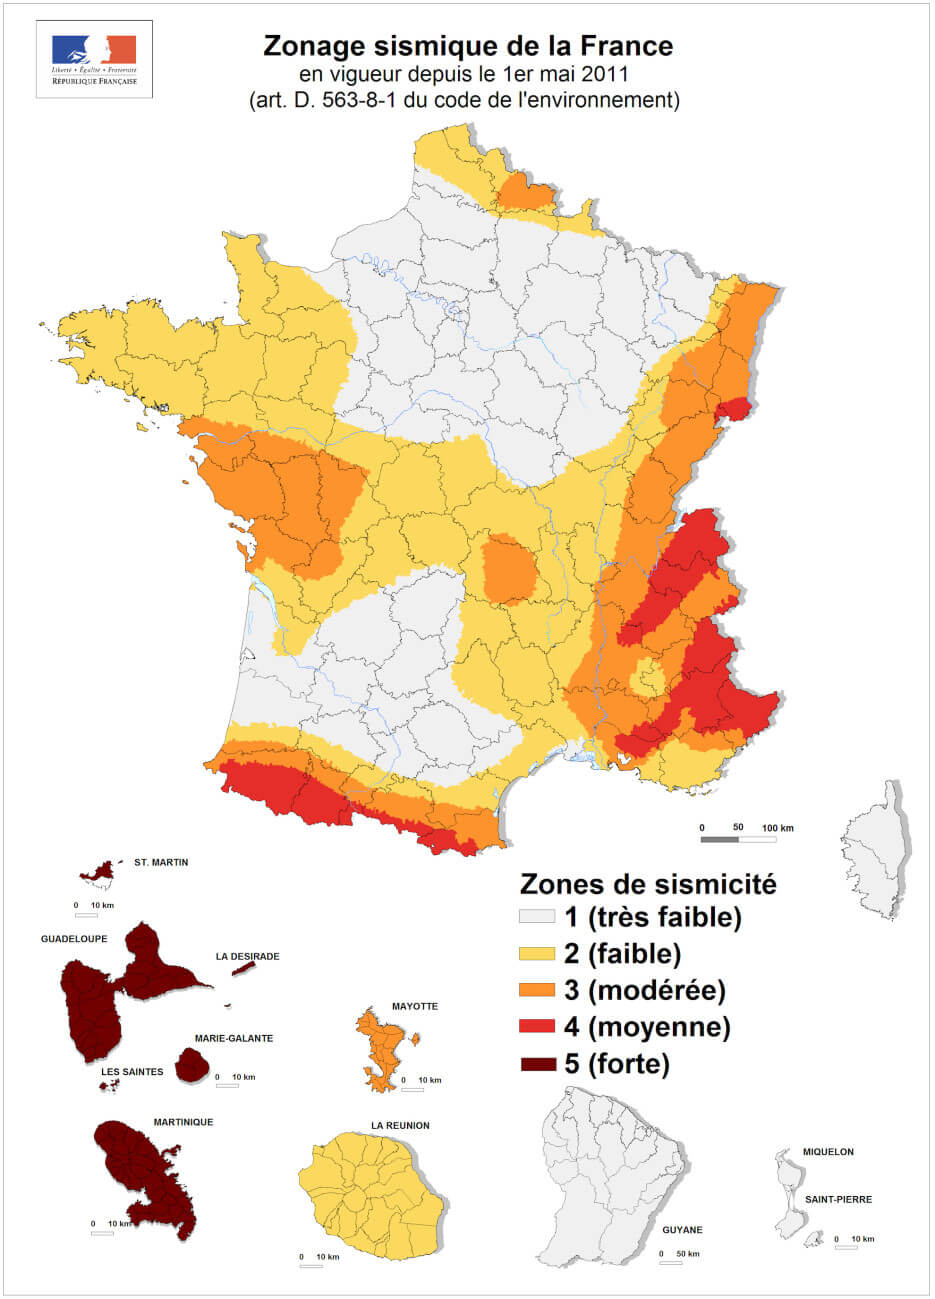 Graphic map of France showing the various seismic zones